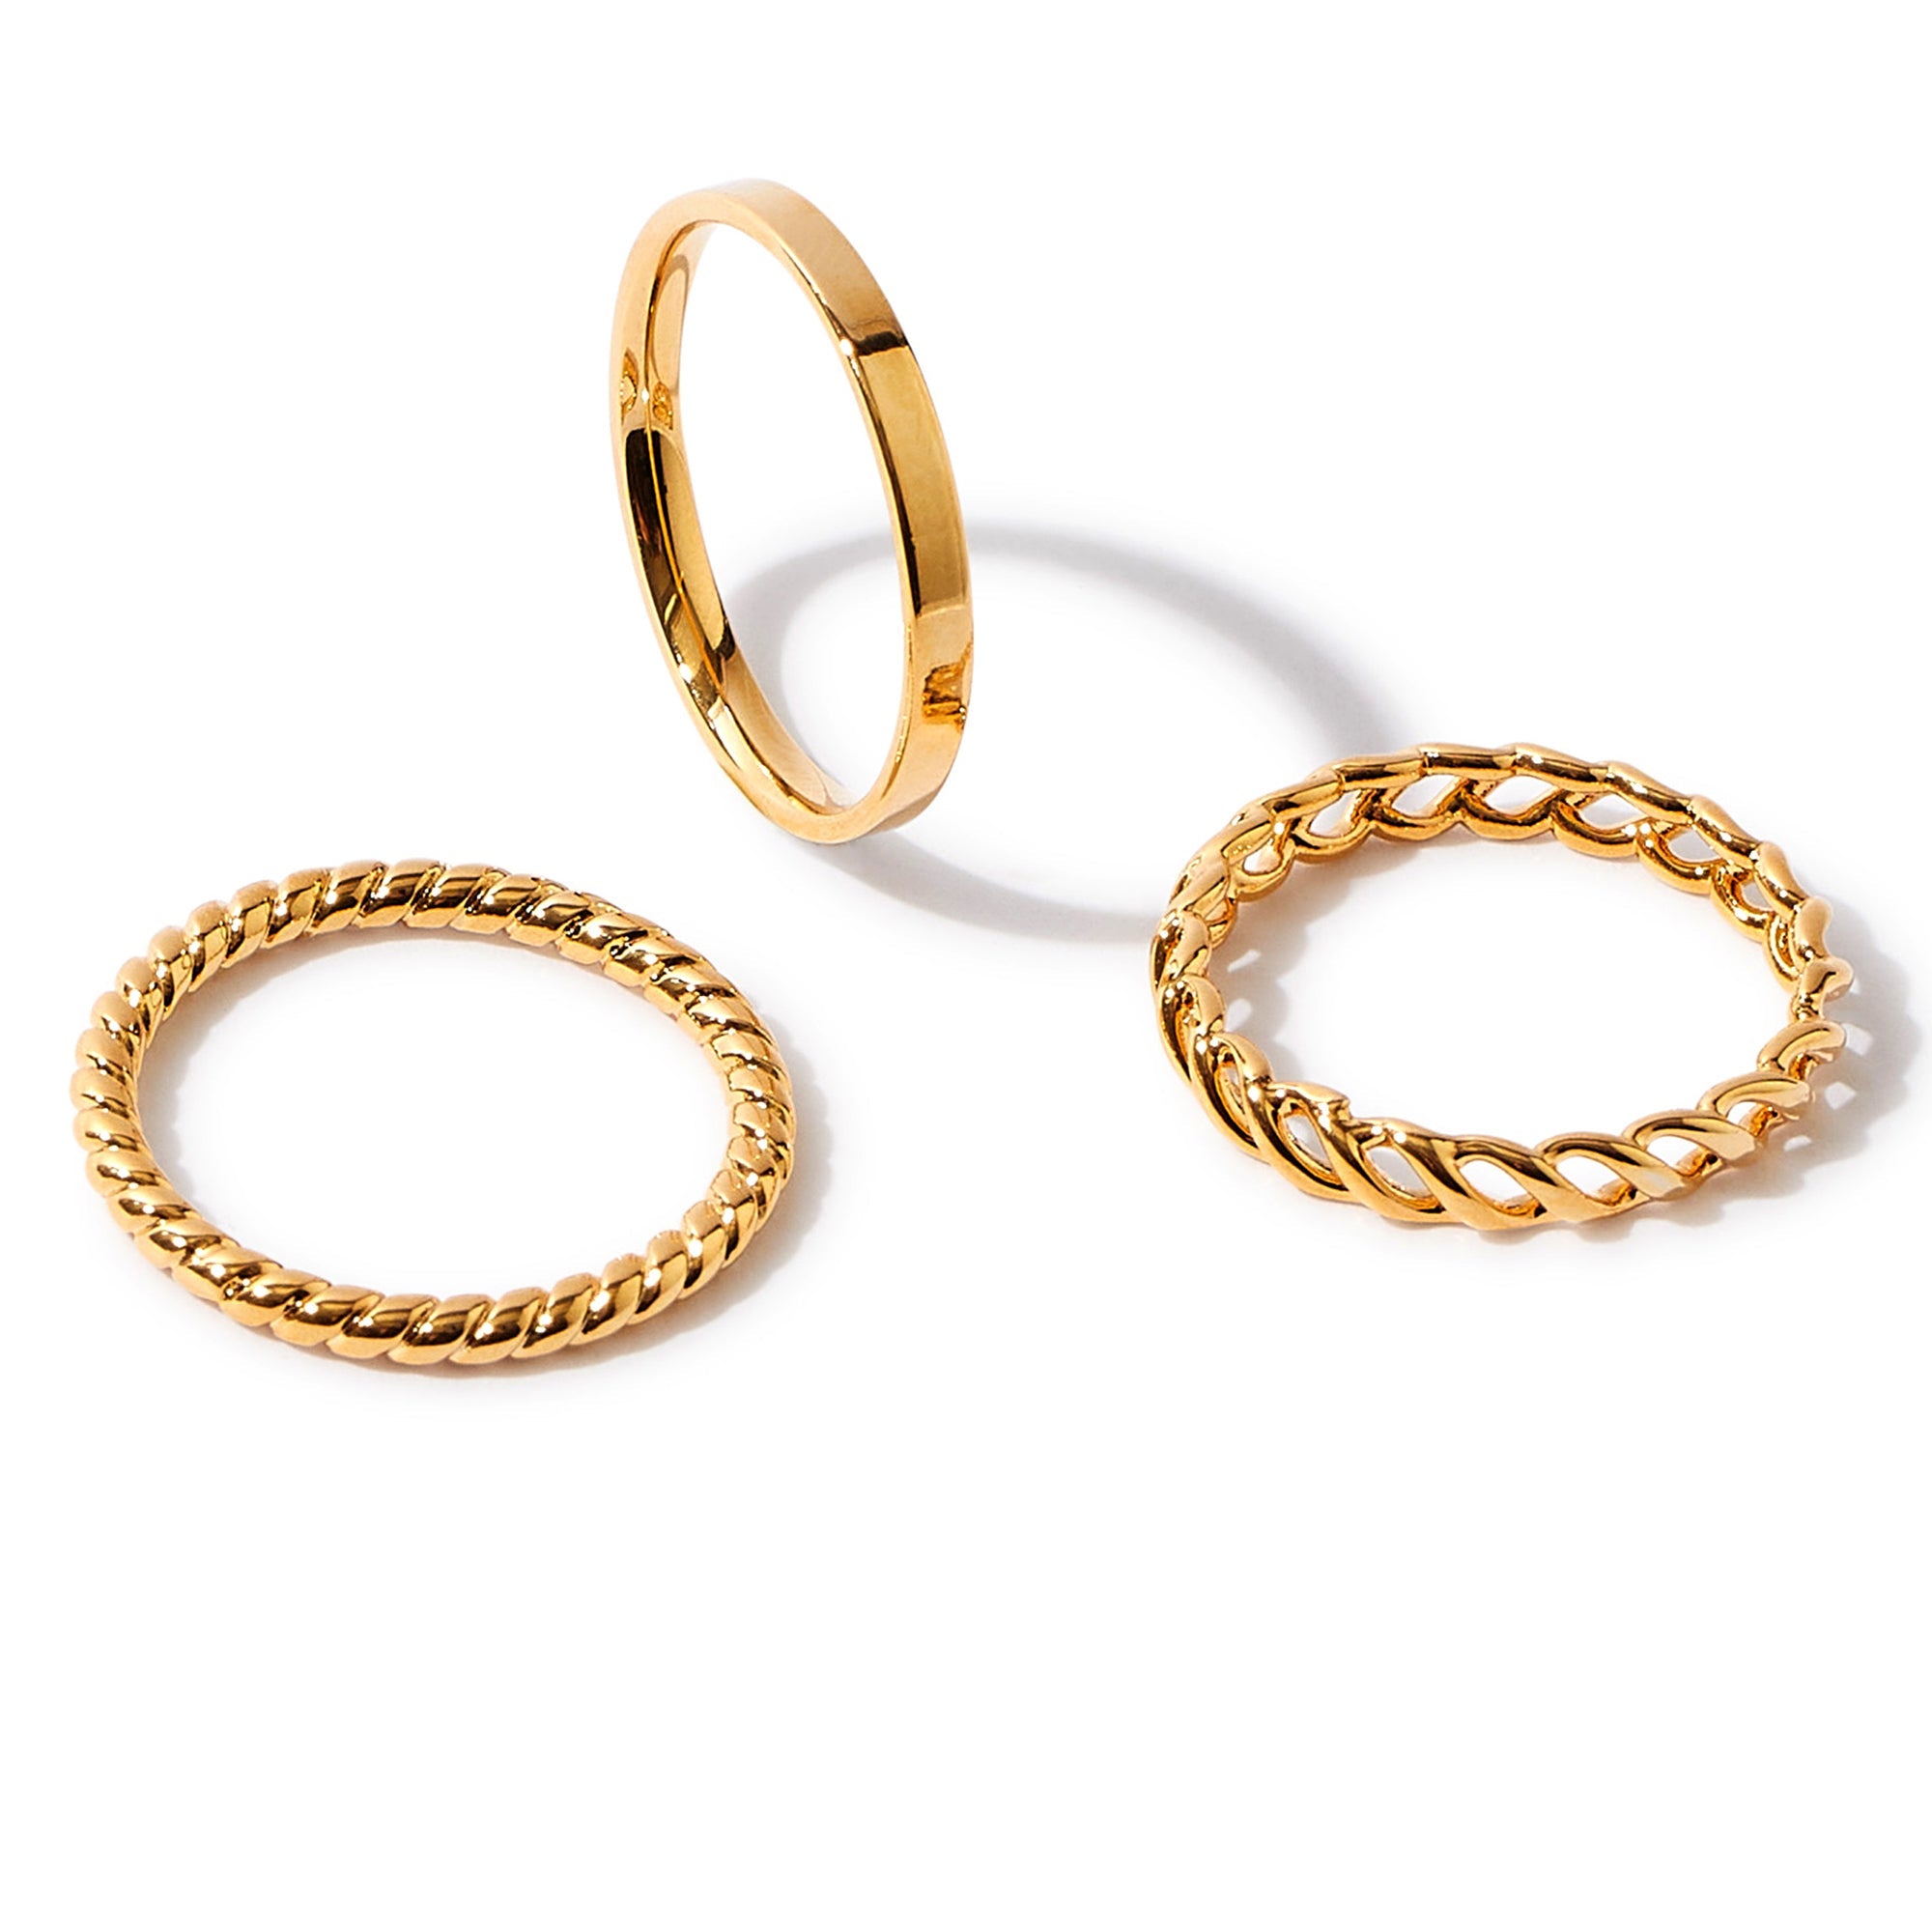 Real Gold Plated 3 Pack Band Stacking Rings For Women By Accessorize London Medium